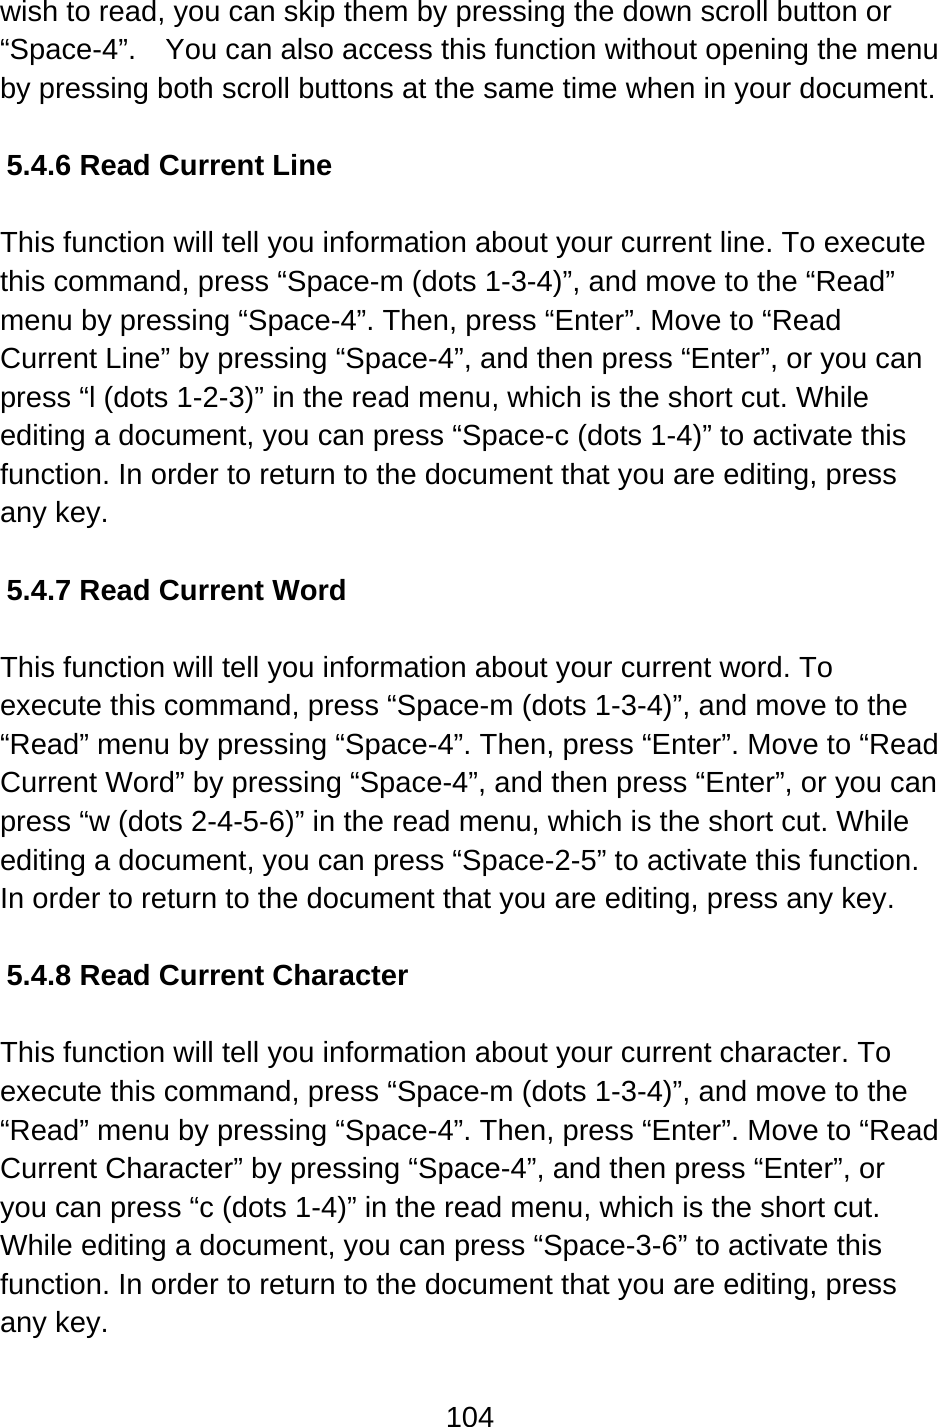 104  wish to read, you can skip them by pressing the down scroll button or “Space-4”.    You can also access this function without opening the menu by pressing both scroll buttons at the same time when in your document.  5.4.6 Read Current Line  This function will tell you information about your current line. To execute this command, press “Space-m (dots 1-3-4)”, and move to the “Read” menu by pressing “Space-4”. Then, press “Enter”. Move to “Read Current Line” by pressing “Space-4”, and then press “Enter”, or you can press “l (dots 1-2-3)” in the read menu, which is the short cut. While editing a document, you can press “Space-c (dots 1-4)” to activate this function. In order to return to the document that you are editing, press any key.    5.4.7 Read Current Word  This function will tell you information about your current word. To execute this command, press “Space-m (dots 1-3-4)”, and move to the “Read” menu by pressing “Space-4”. Then, press “Enter”. Move to “Read Current Word” by pressing “Space-4”, and then press “Enter”, or you can press “w (dots 2-4-5-6)” in the read menu, which is the short cut. While editing a document, you can press “Space-2-5” to activate this function. In order to return to the document that you are editing, press any key.    5.4.8 Read Current Character  This function will tell you information about your current character. To execute this command, press “Space-m (dots 1-3-4)”, and move to the “Read” menu by pressing “Space-4”. Then, press “Enter”. Move to “Read Current Character” by pressing “Space-4”, and then press “Enter”, or you can press “c (dots 1-4)” in the read menu, which is the short cut. While editing a document, you can press “Space-3-6” to activate this function. In order to return to the document that you are editing, press any key.    